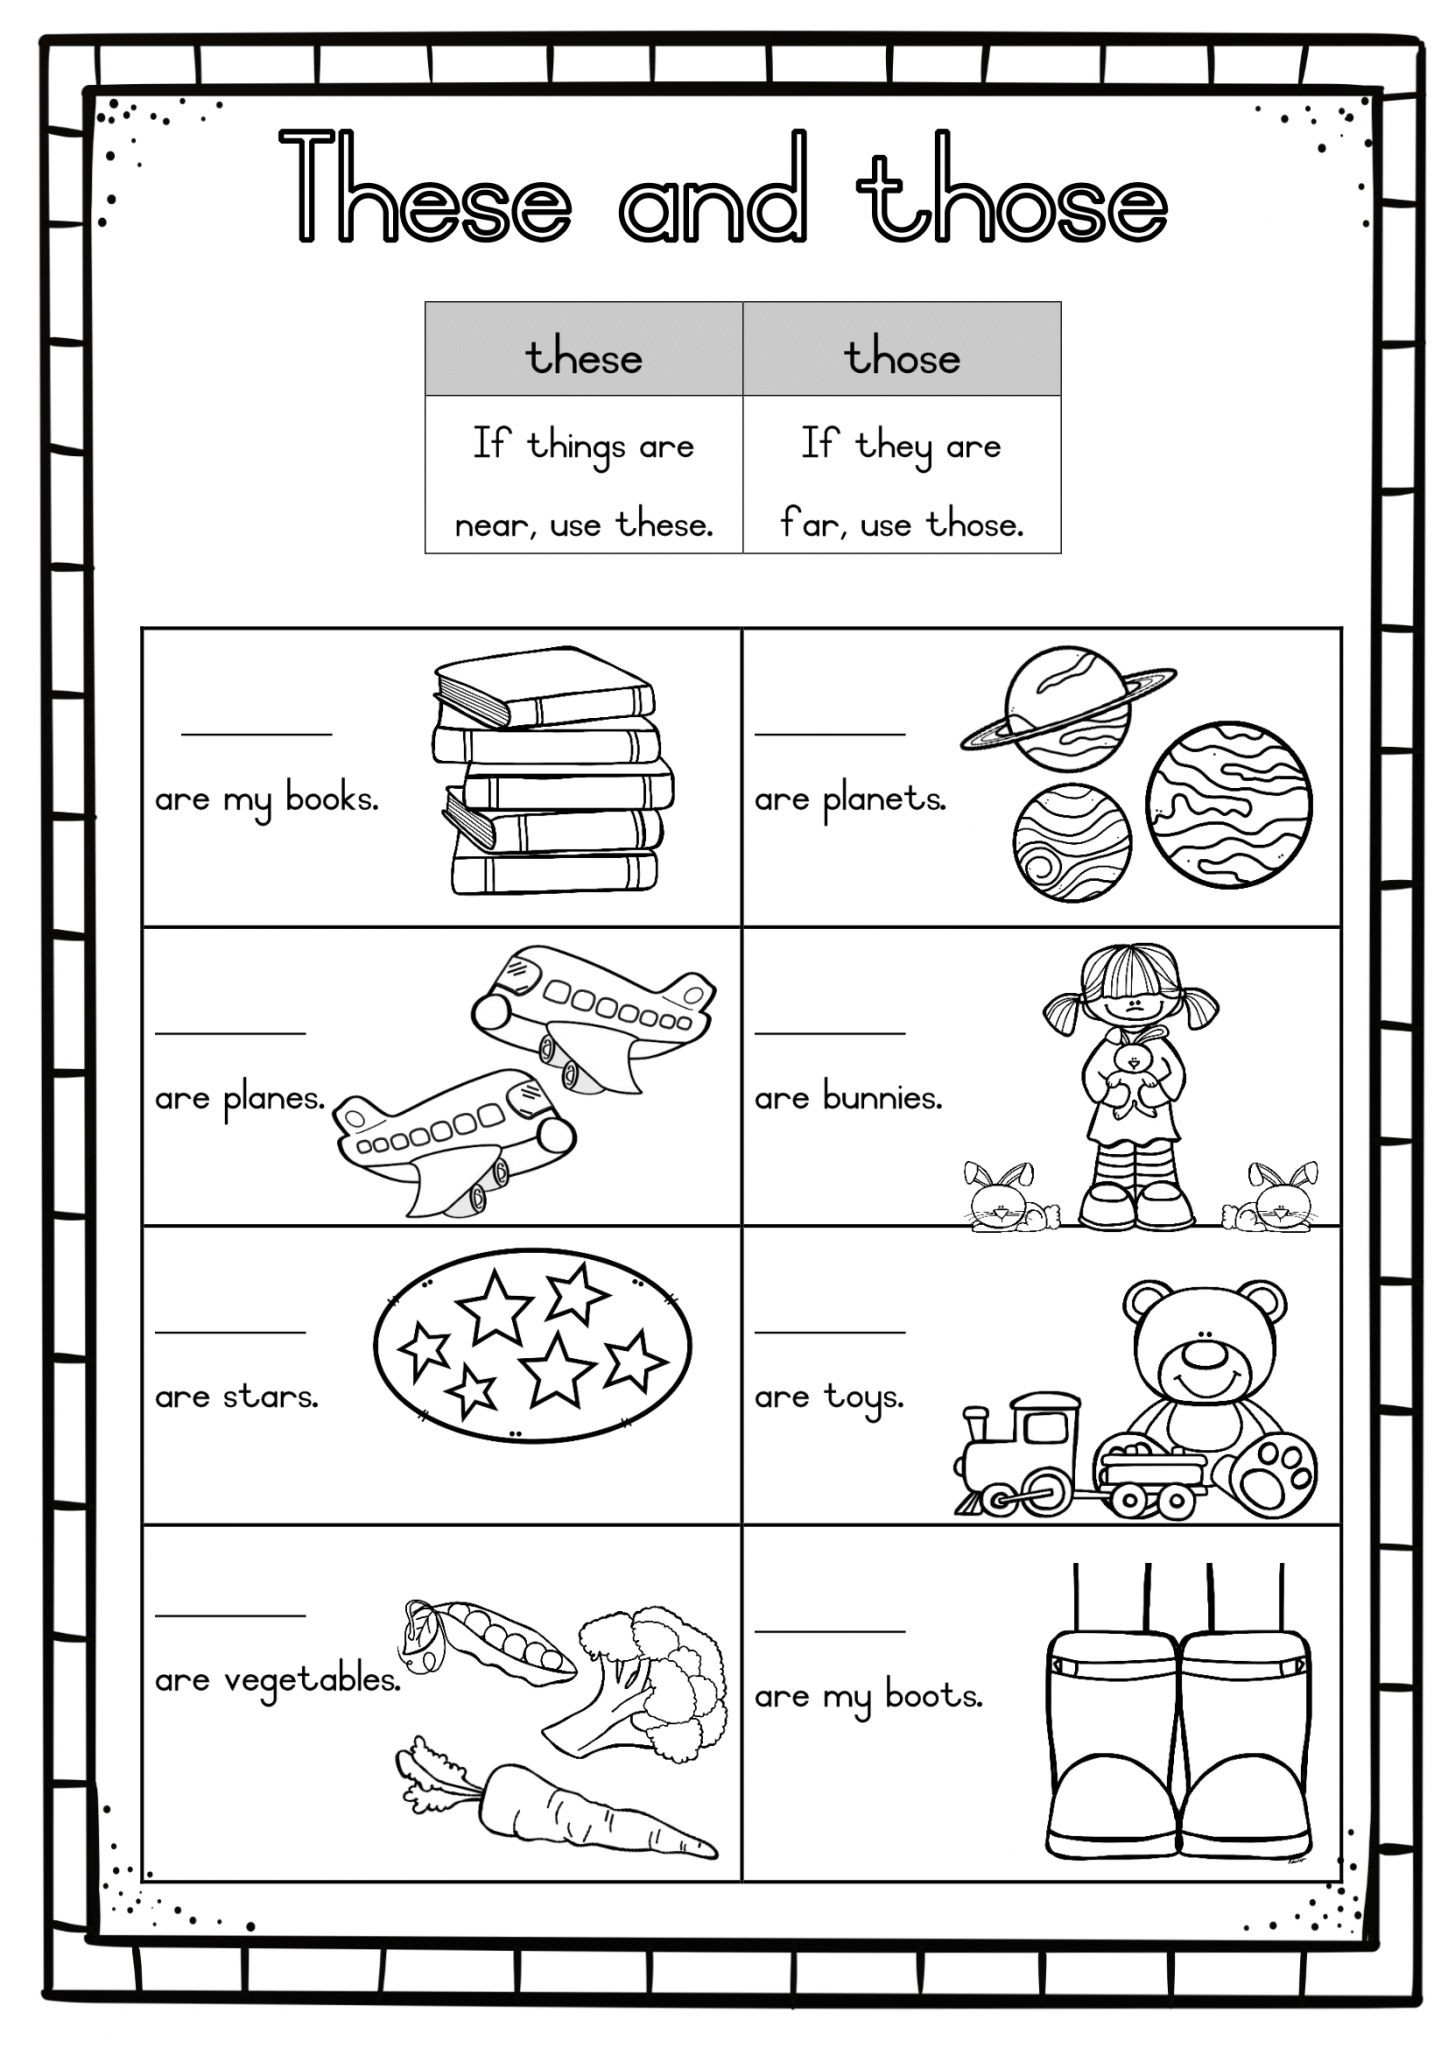 free-printable-afrikaans-worksheets-for-grade-5-learning-how-to-read